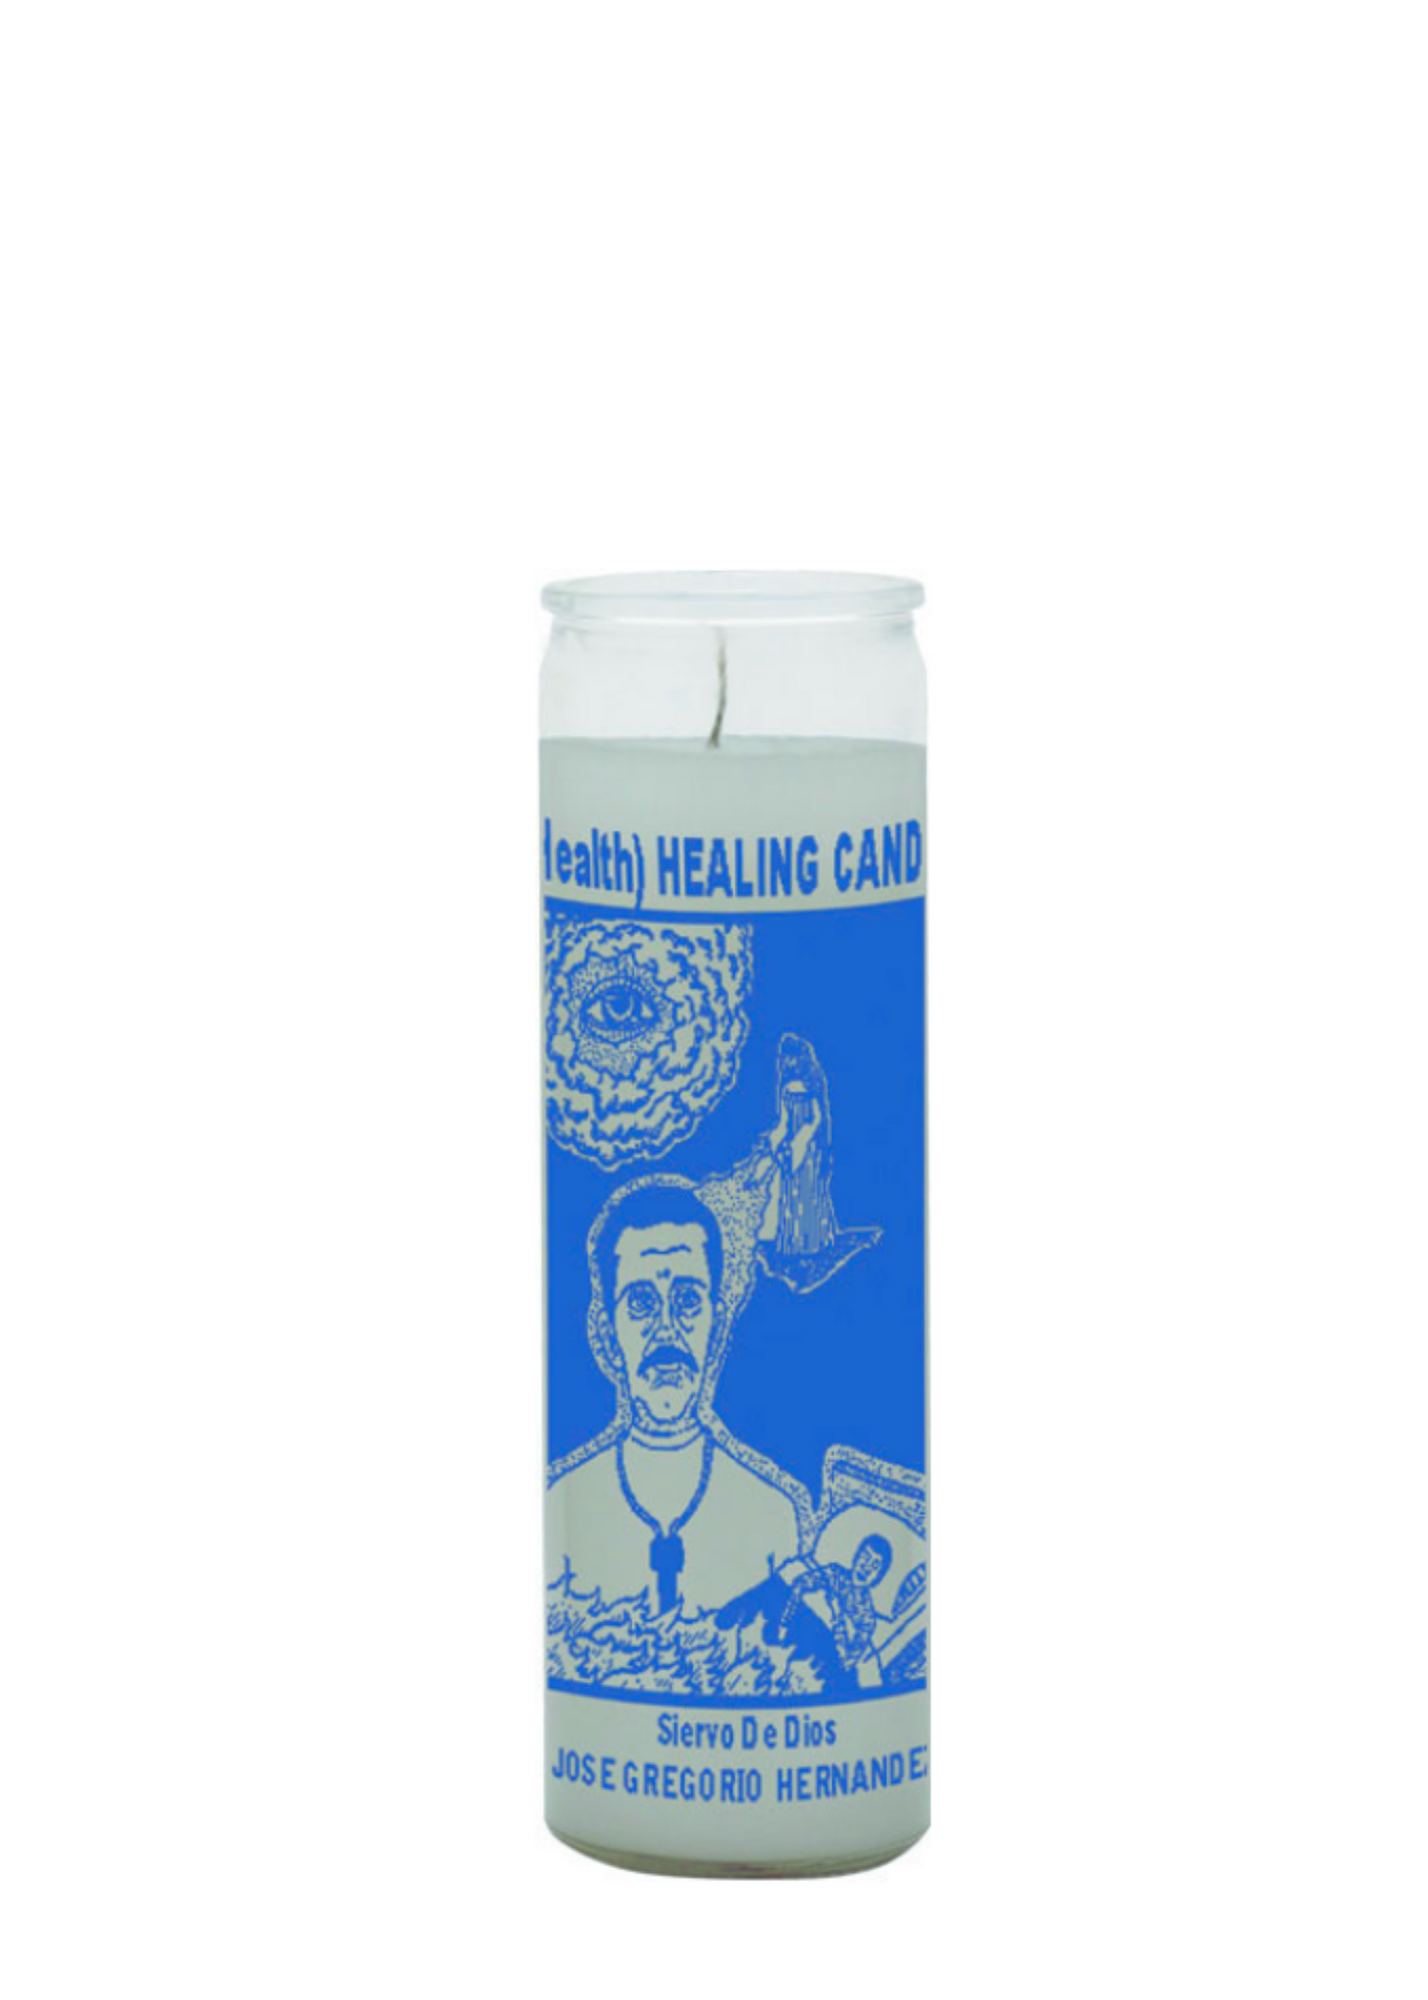 Health healing (white) 1 color 7 day candle